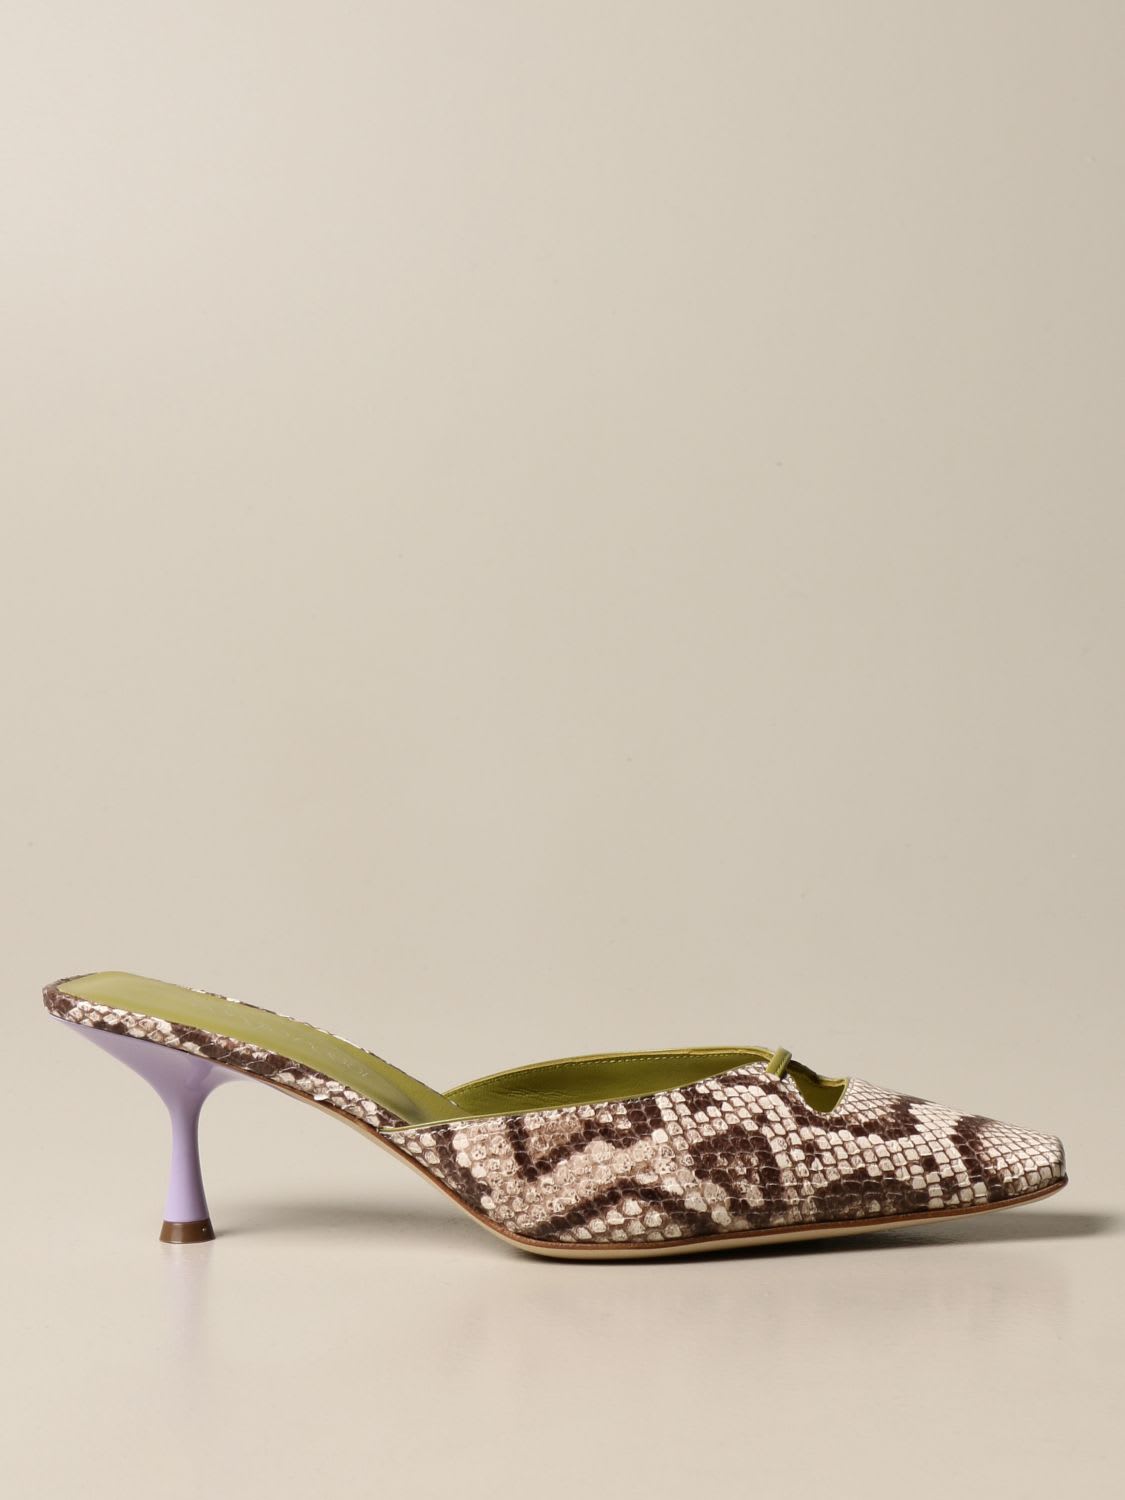 Sergio Rossi Heeled Sandals Sergio Rossi Mules In Leather With Python Print